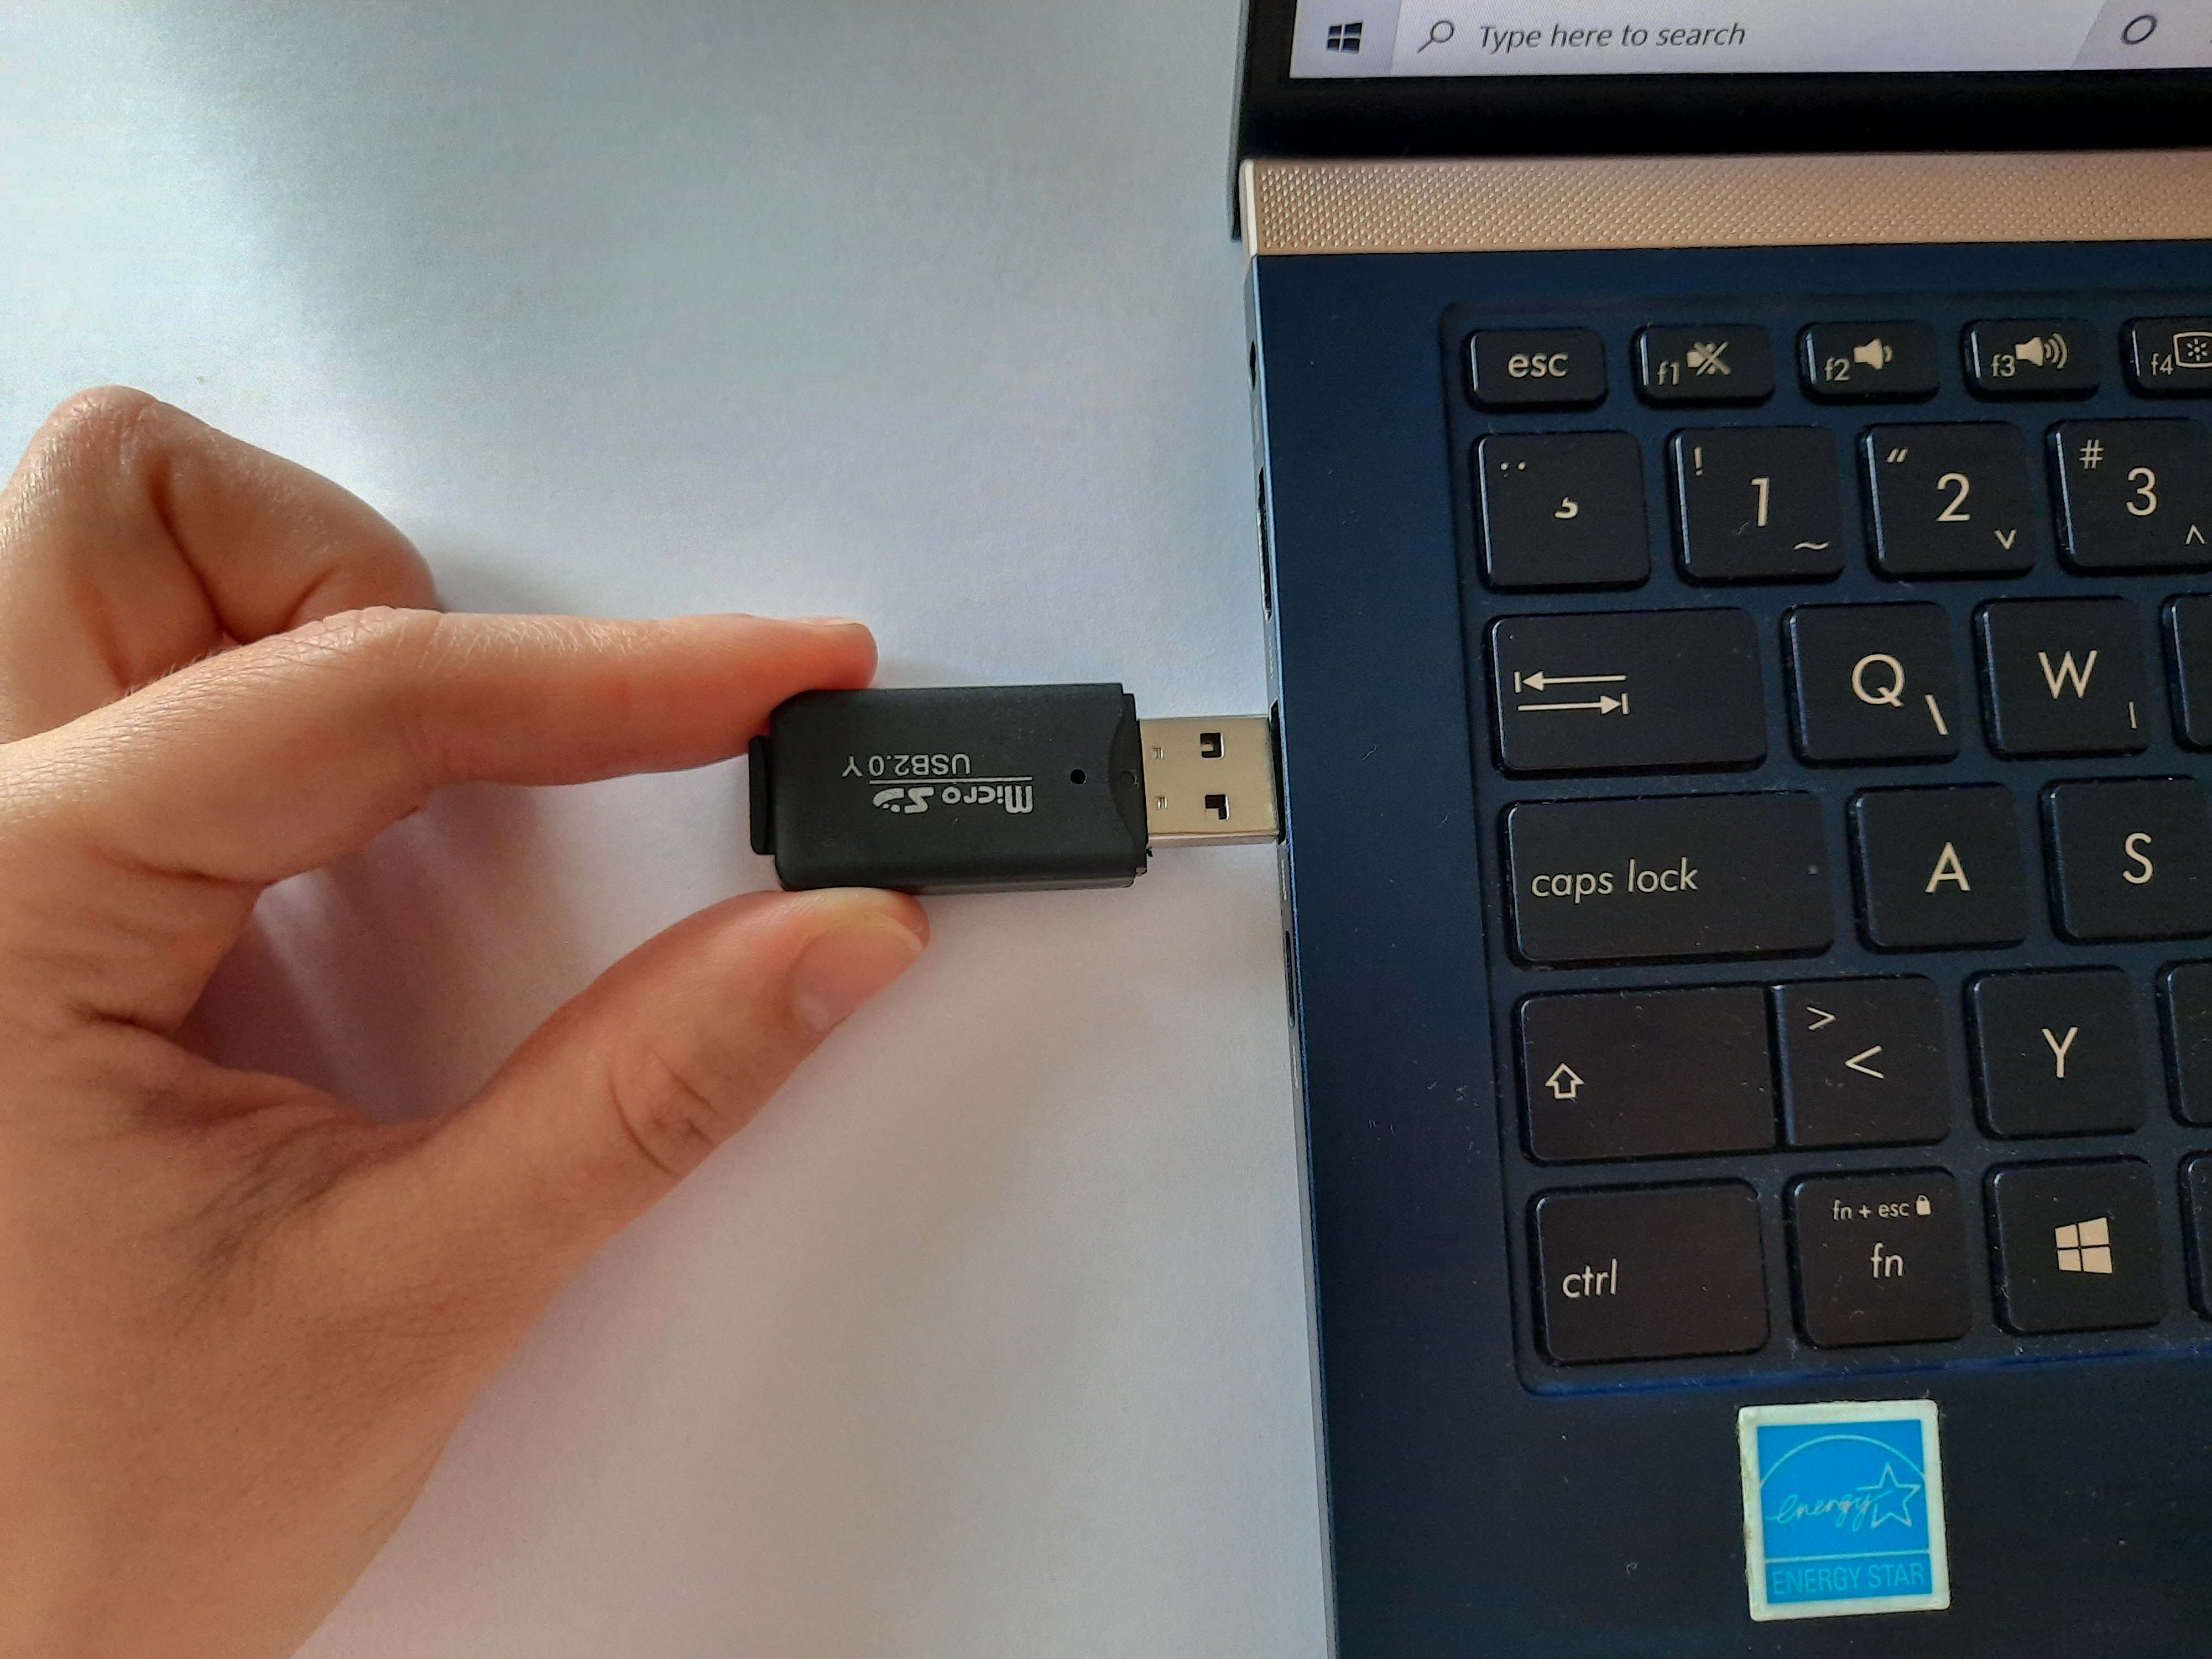 Insert the USB adapter into your computer